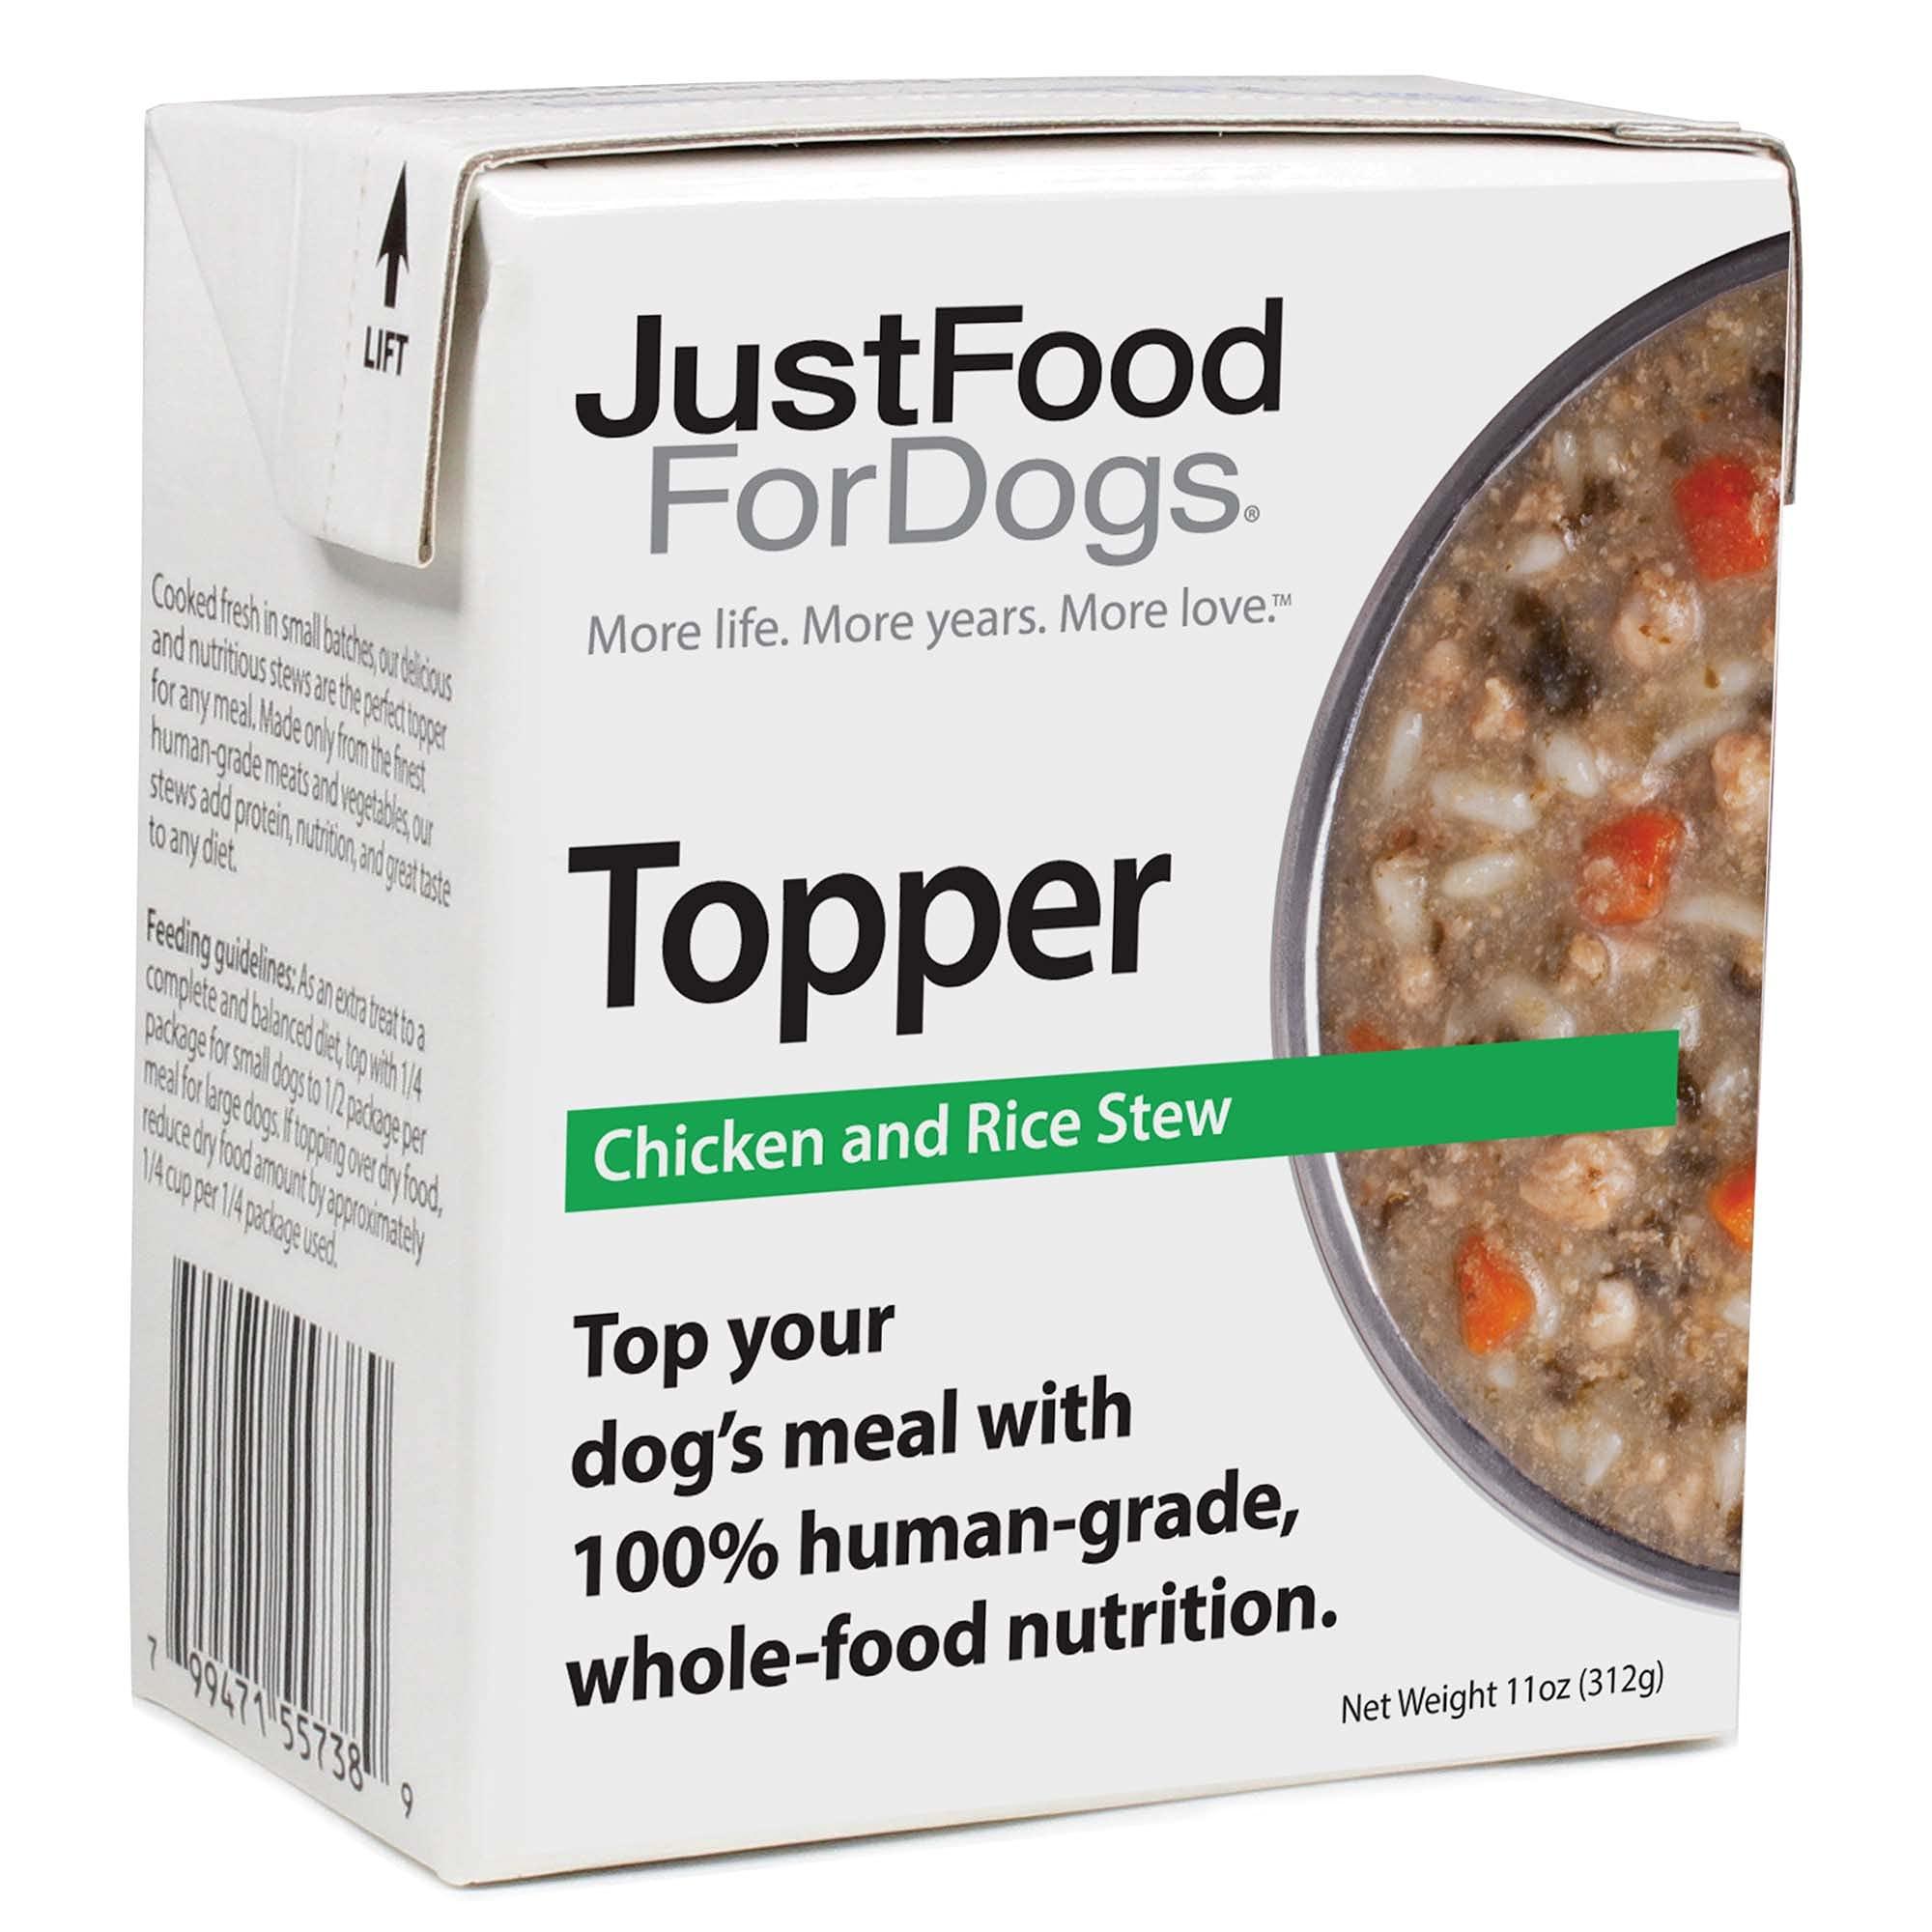 JustFoodforDogs Dog Food Toppers - Chicken & Rice Stew, 12 Pack (11 oz), Wet Dog Food Toppers with Human Grade, Grain Free and Whole-Food Ingredients for Small and Large Pets